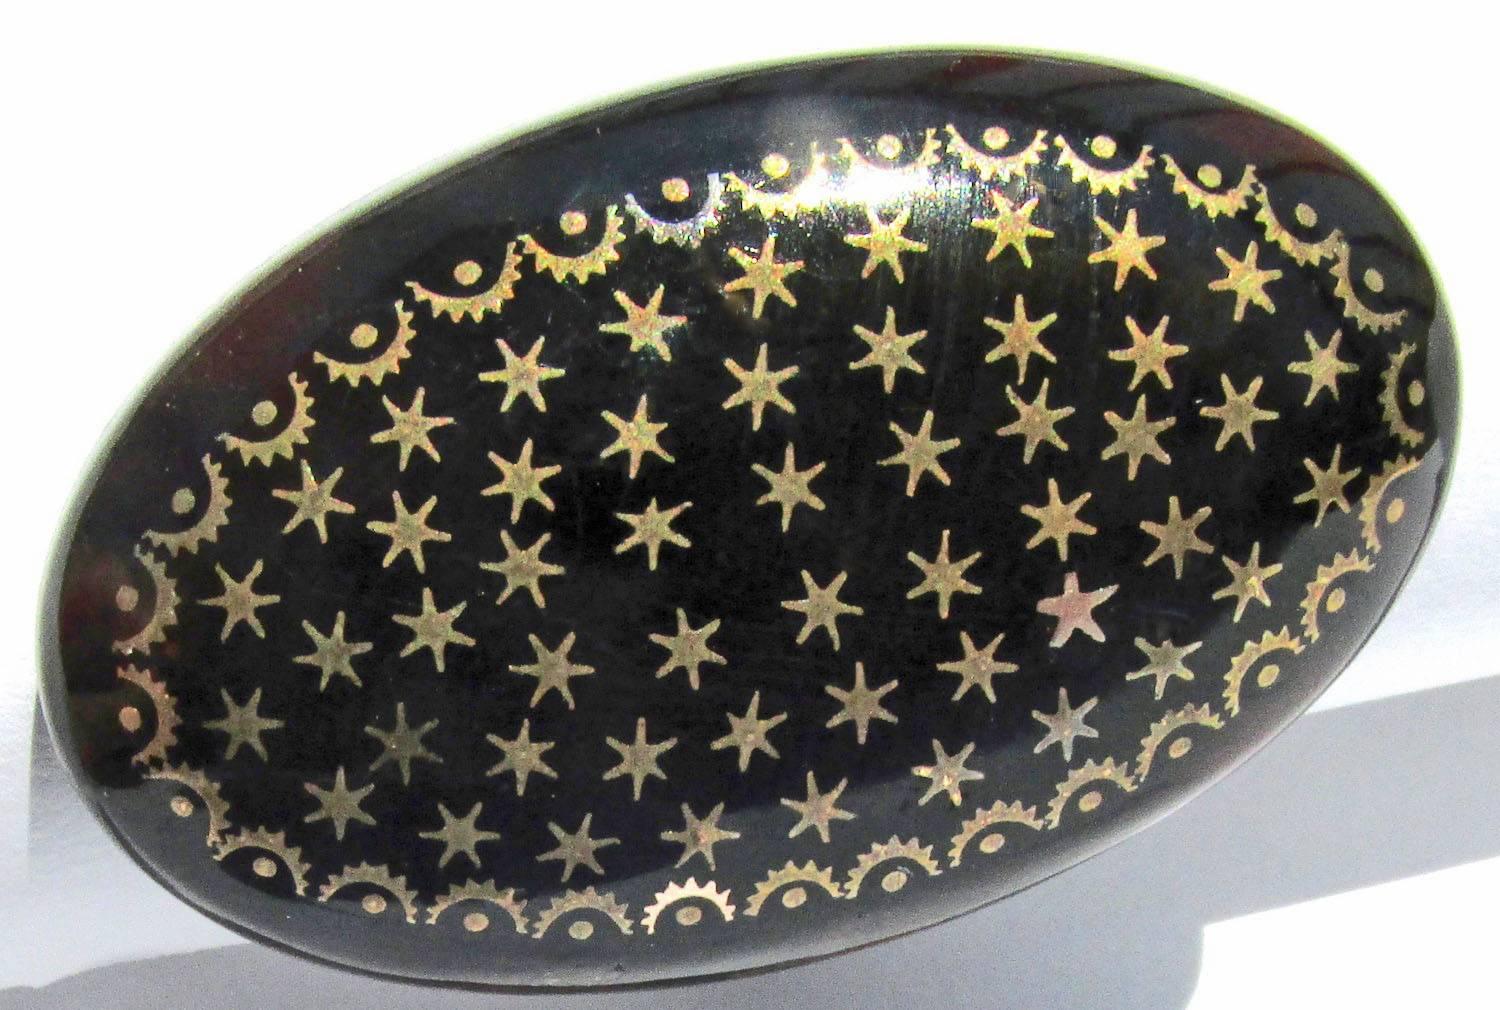 Rare Victorian oval pique ring decorated with stars and a scalloped border. Pique was brought to England by the Huguenots who developed the technique for inlaying tortoiseshell with gold and silver. This piece is inlaid with gold. The ring is a size